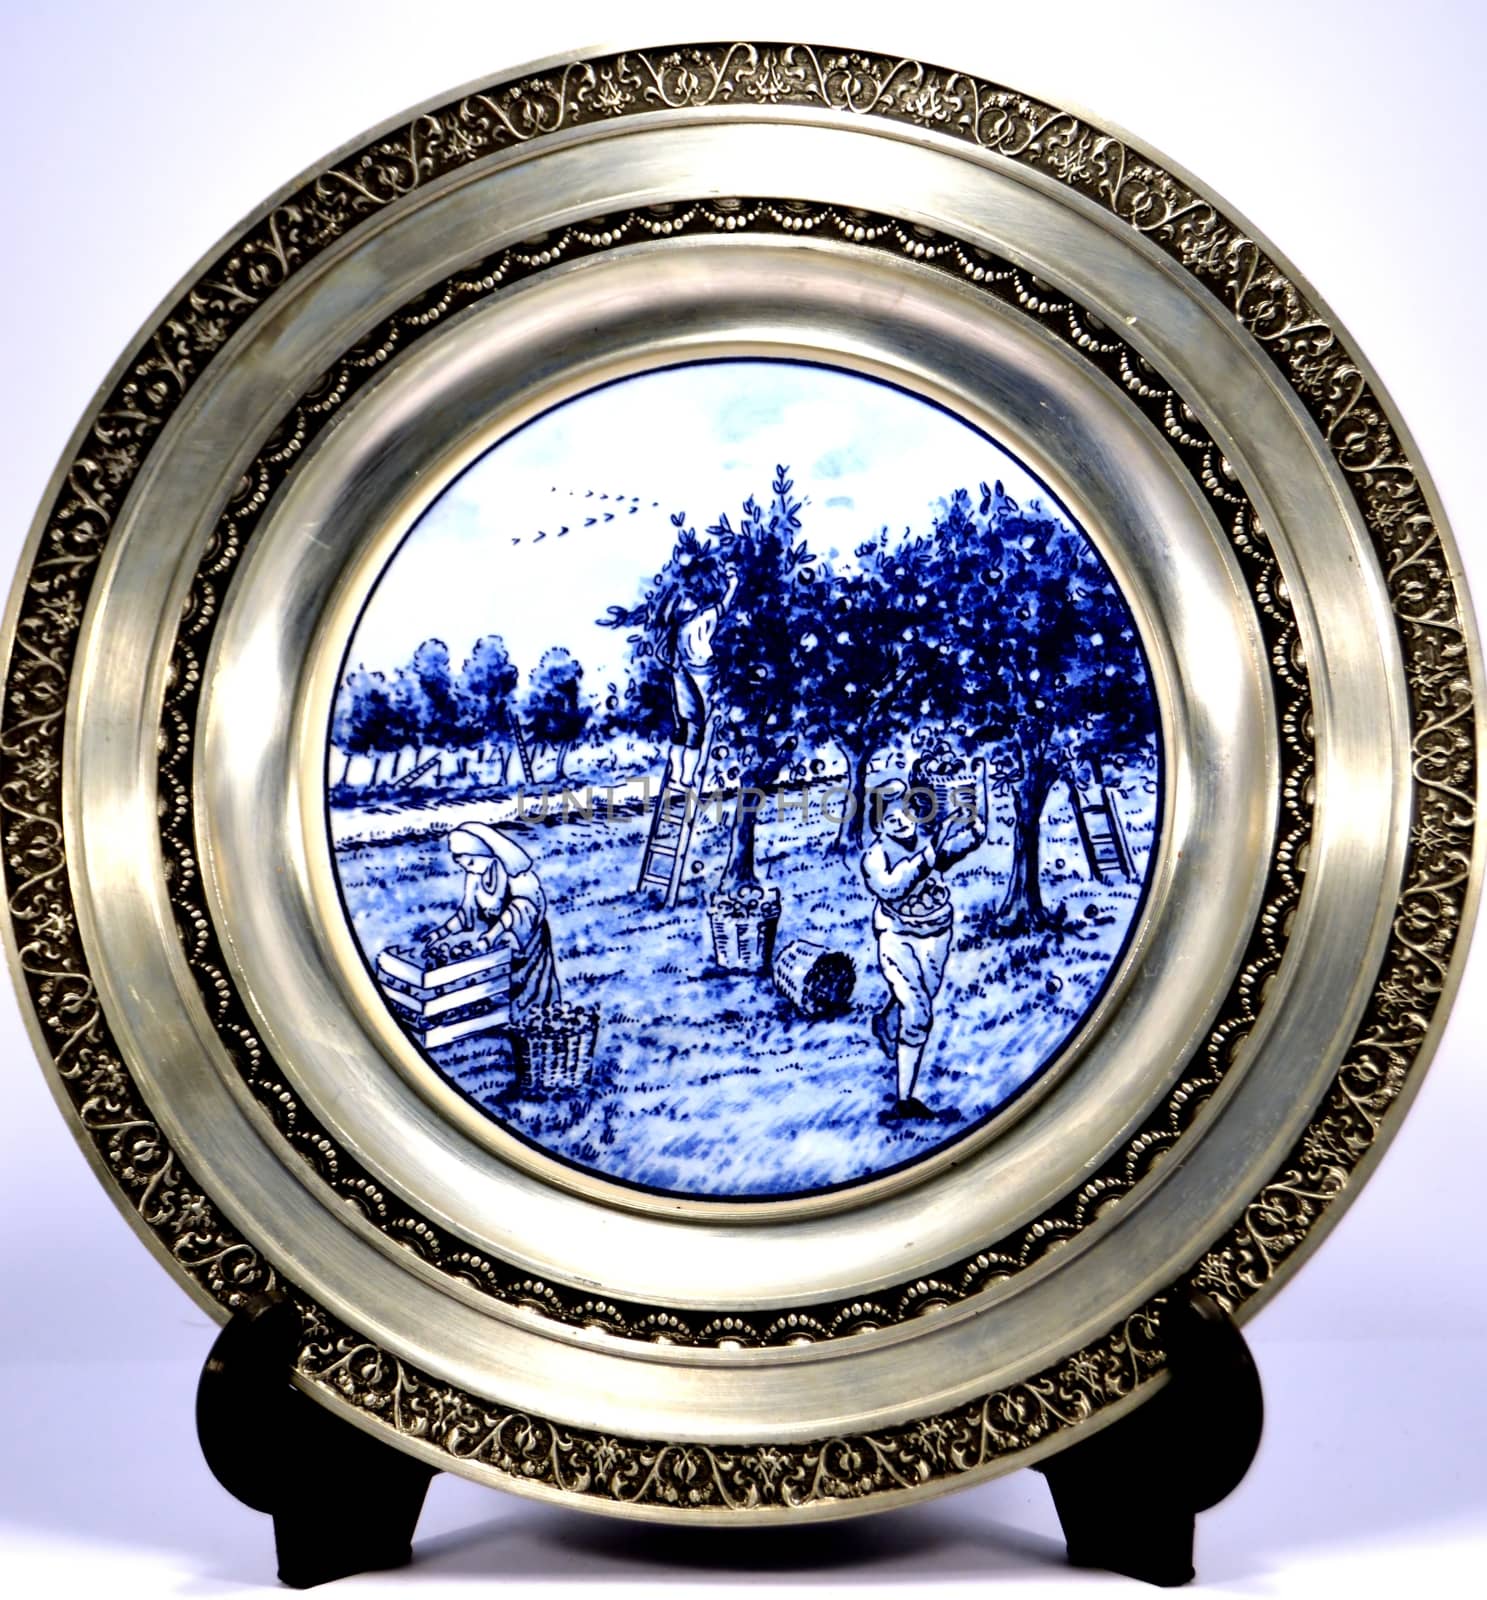 Pewter plate with a representation of the rural life.